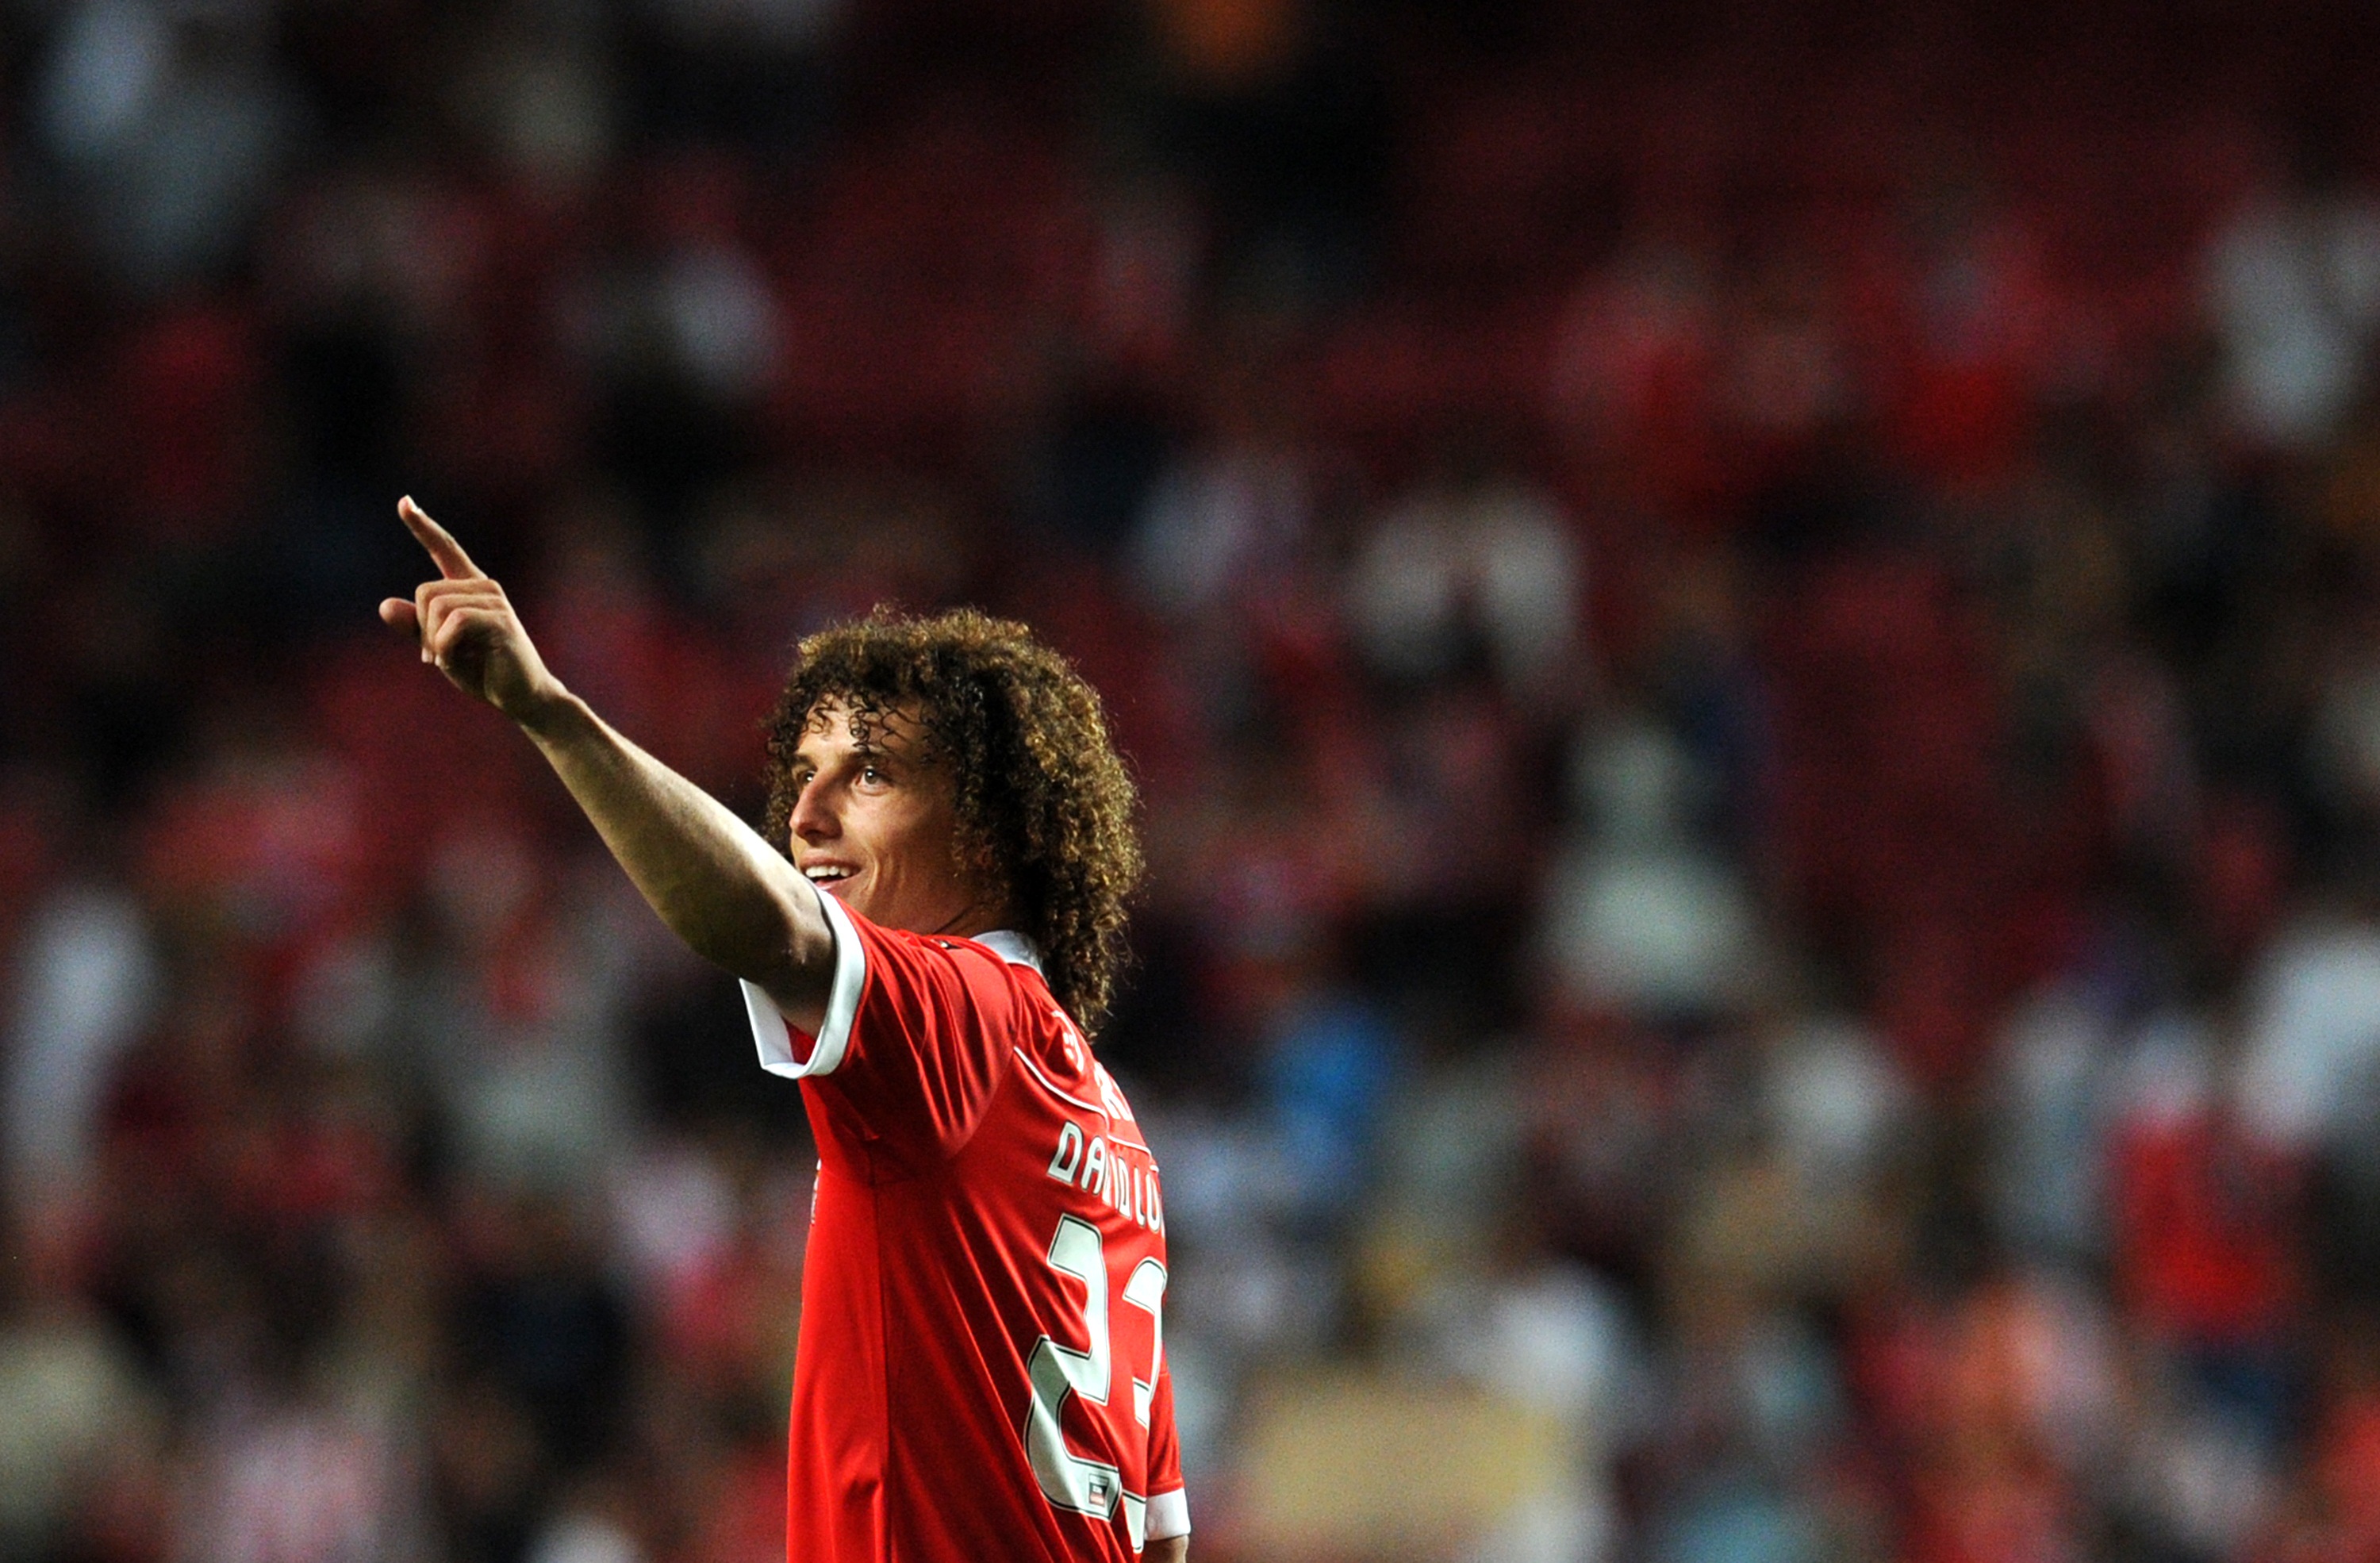 LISBON, PORTUGAL - AUGUST 28:  David Luiz of Benfica gestures during the Portuguese Liga match between Benfica and Vitoria Setubal at Luz Stadium on August 28, 2010 in Lisbon, Portugal.  (Photo by Patricia de Melo/EuroFootball/Getty Images)